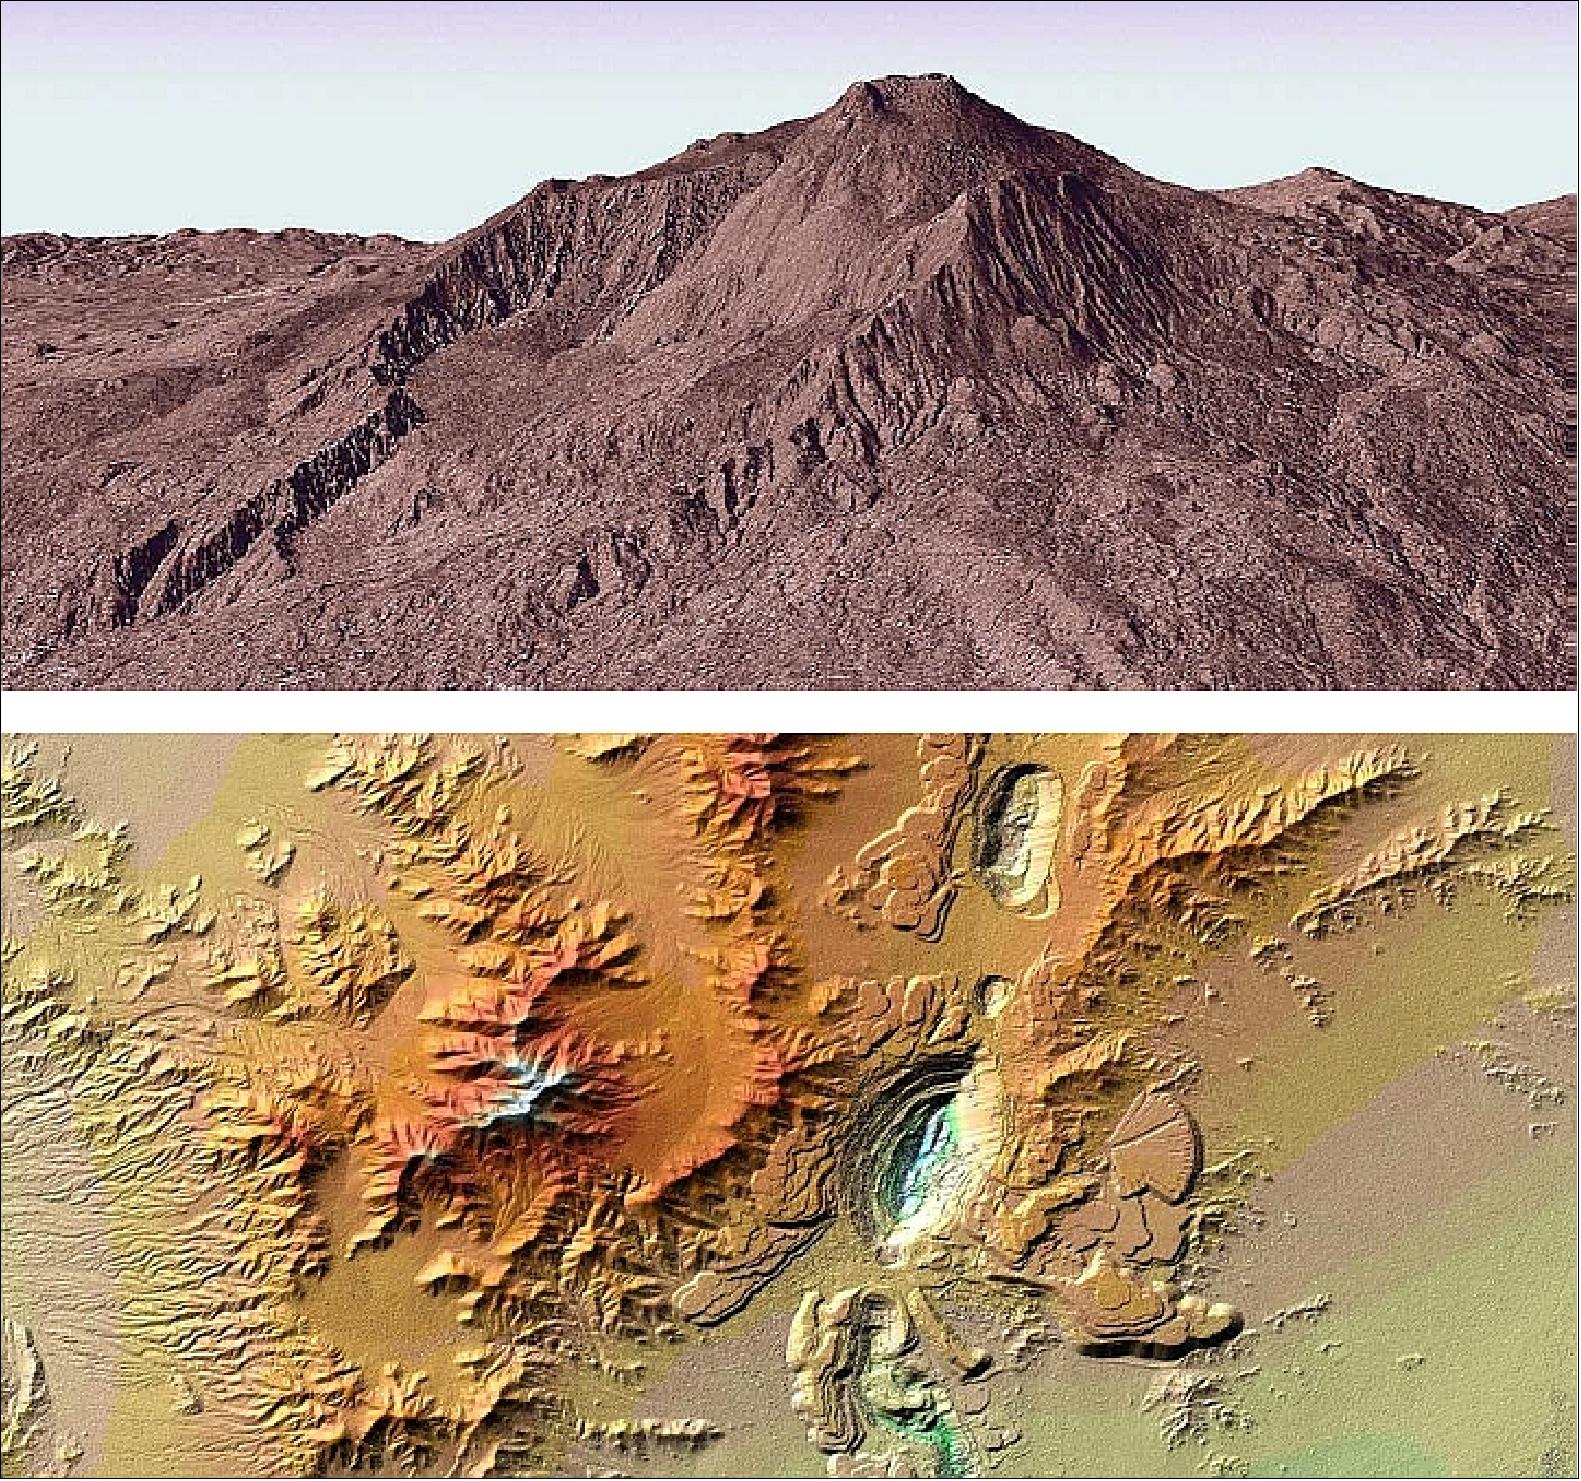 Figure 71: Examples of digital elevation models acquired by TanDEM-X acquired during the commissioning phase. Top: Italian volcano Mount Etna, located on the east coast of Sicily. Bottom: Chuquicamata, the biggest copper mine in the world, located in the north of Chile (image credit: DLR, Ref. 120)